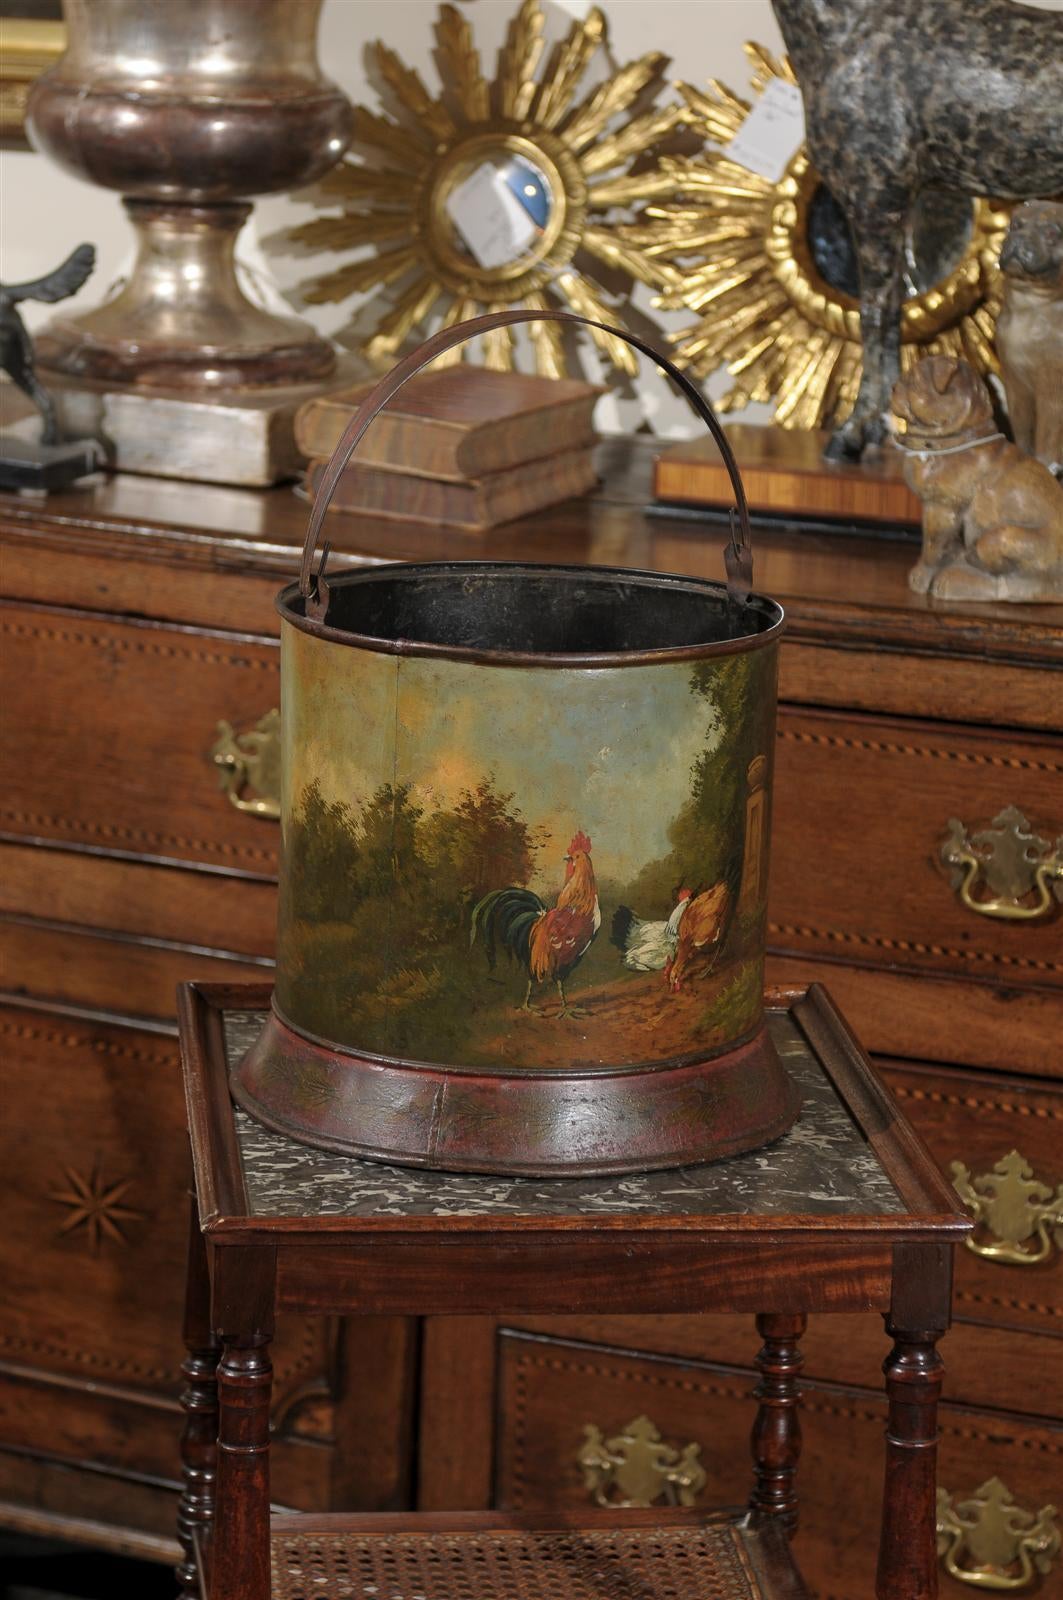 A French painted tole bucket with chicken barnyard scene from the late 19th century. Born in the later years of the 19th century during the French Third Republic, this tole bucket depicts a serene barnyard scene. A proud rooster (the French national